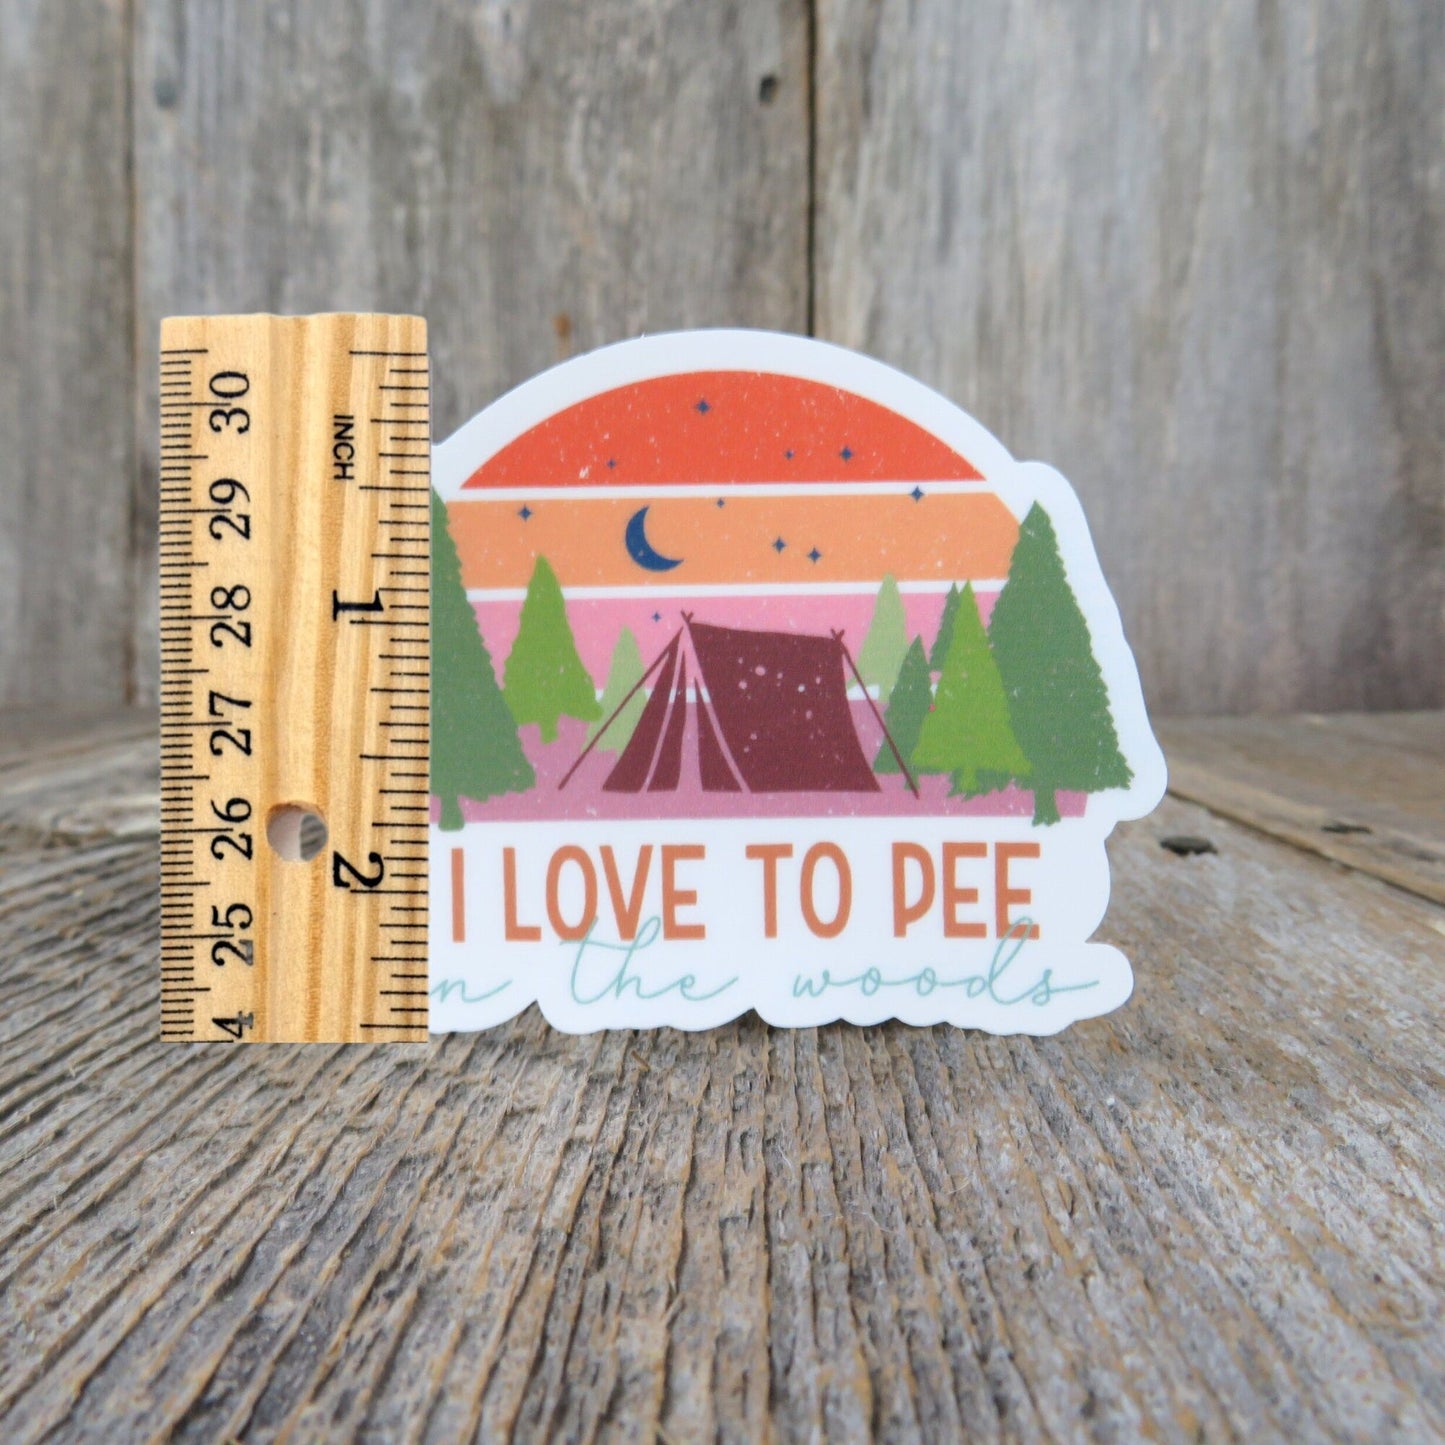 I Love To Pee In The Woods Sticker Full Color Retro Sunset Outdoors Camping Mountains